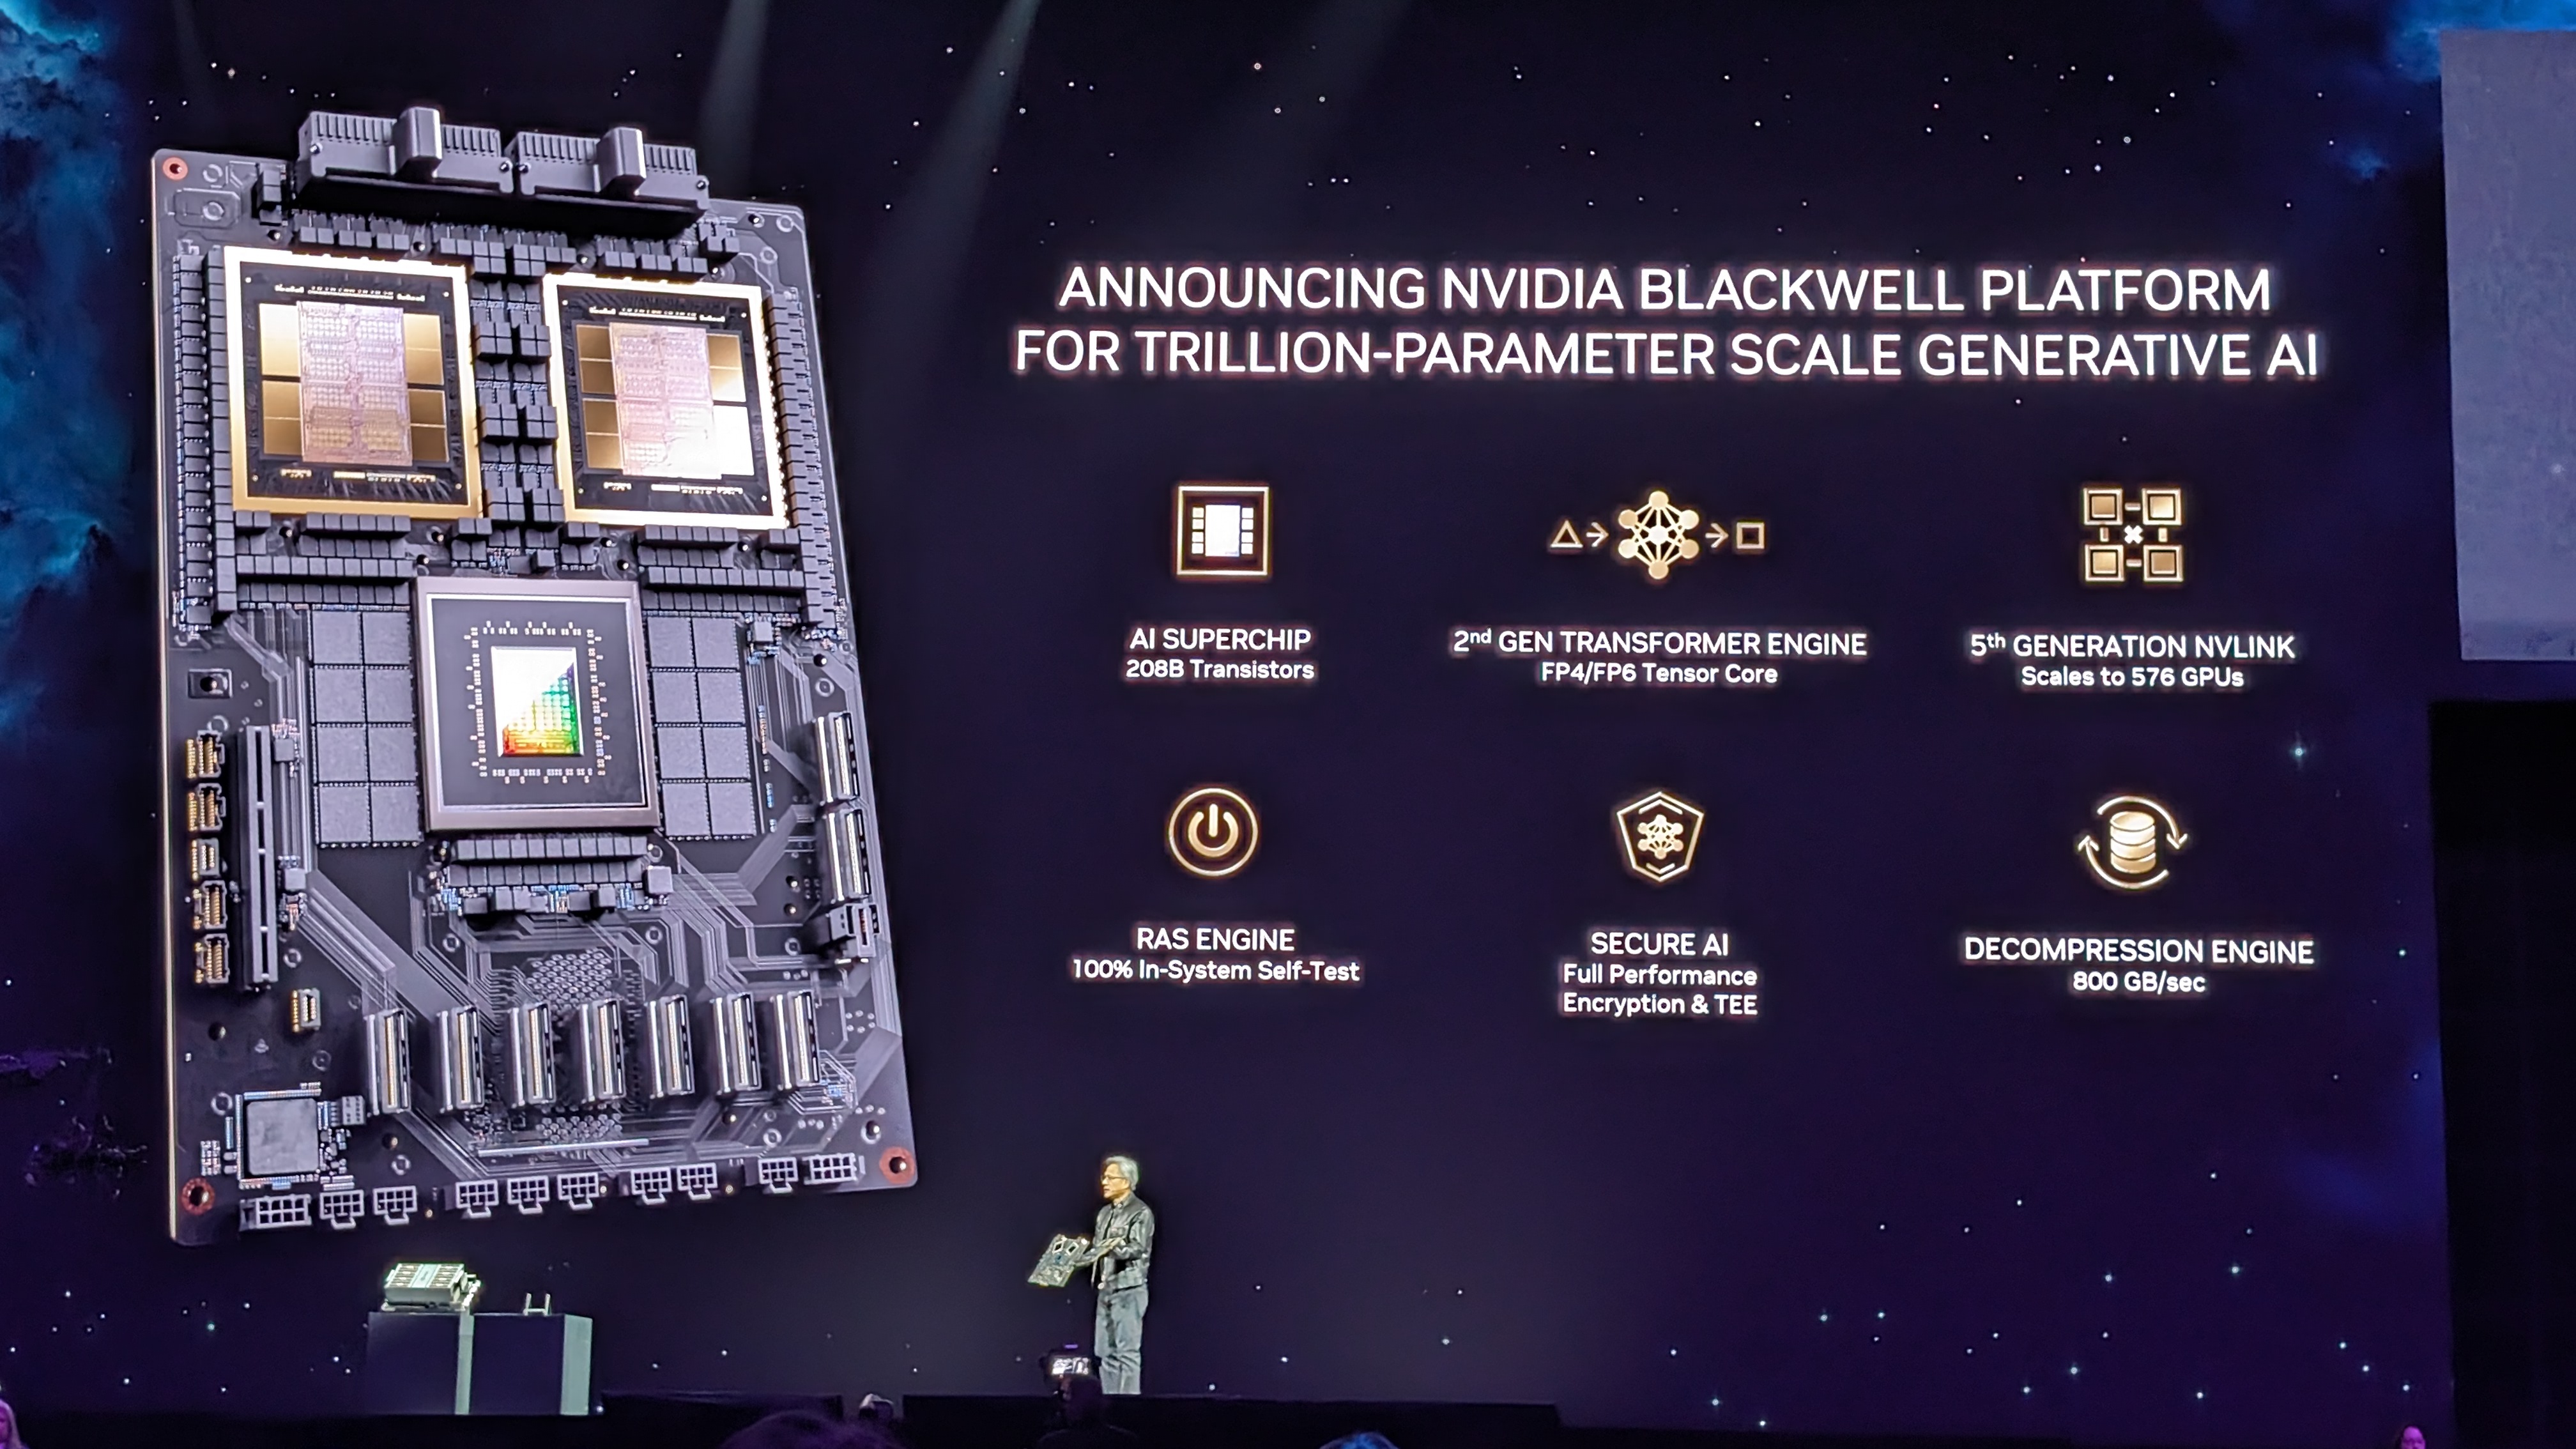 The world's most powerful chip" – Nvidia says its new Blackwell is set to  power the next generation of AI | TechRadar